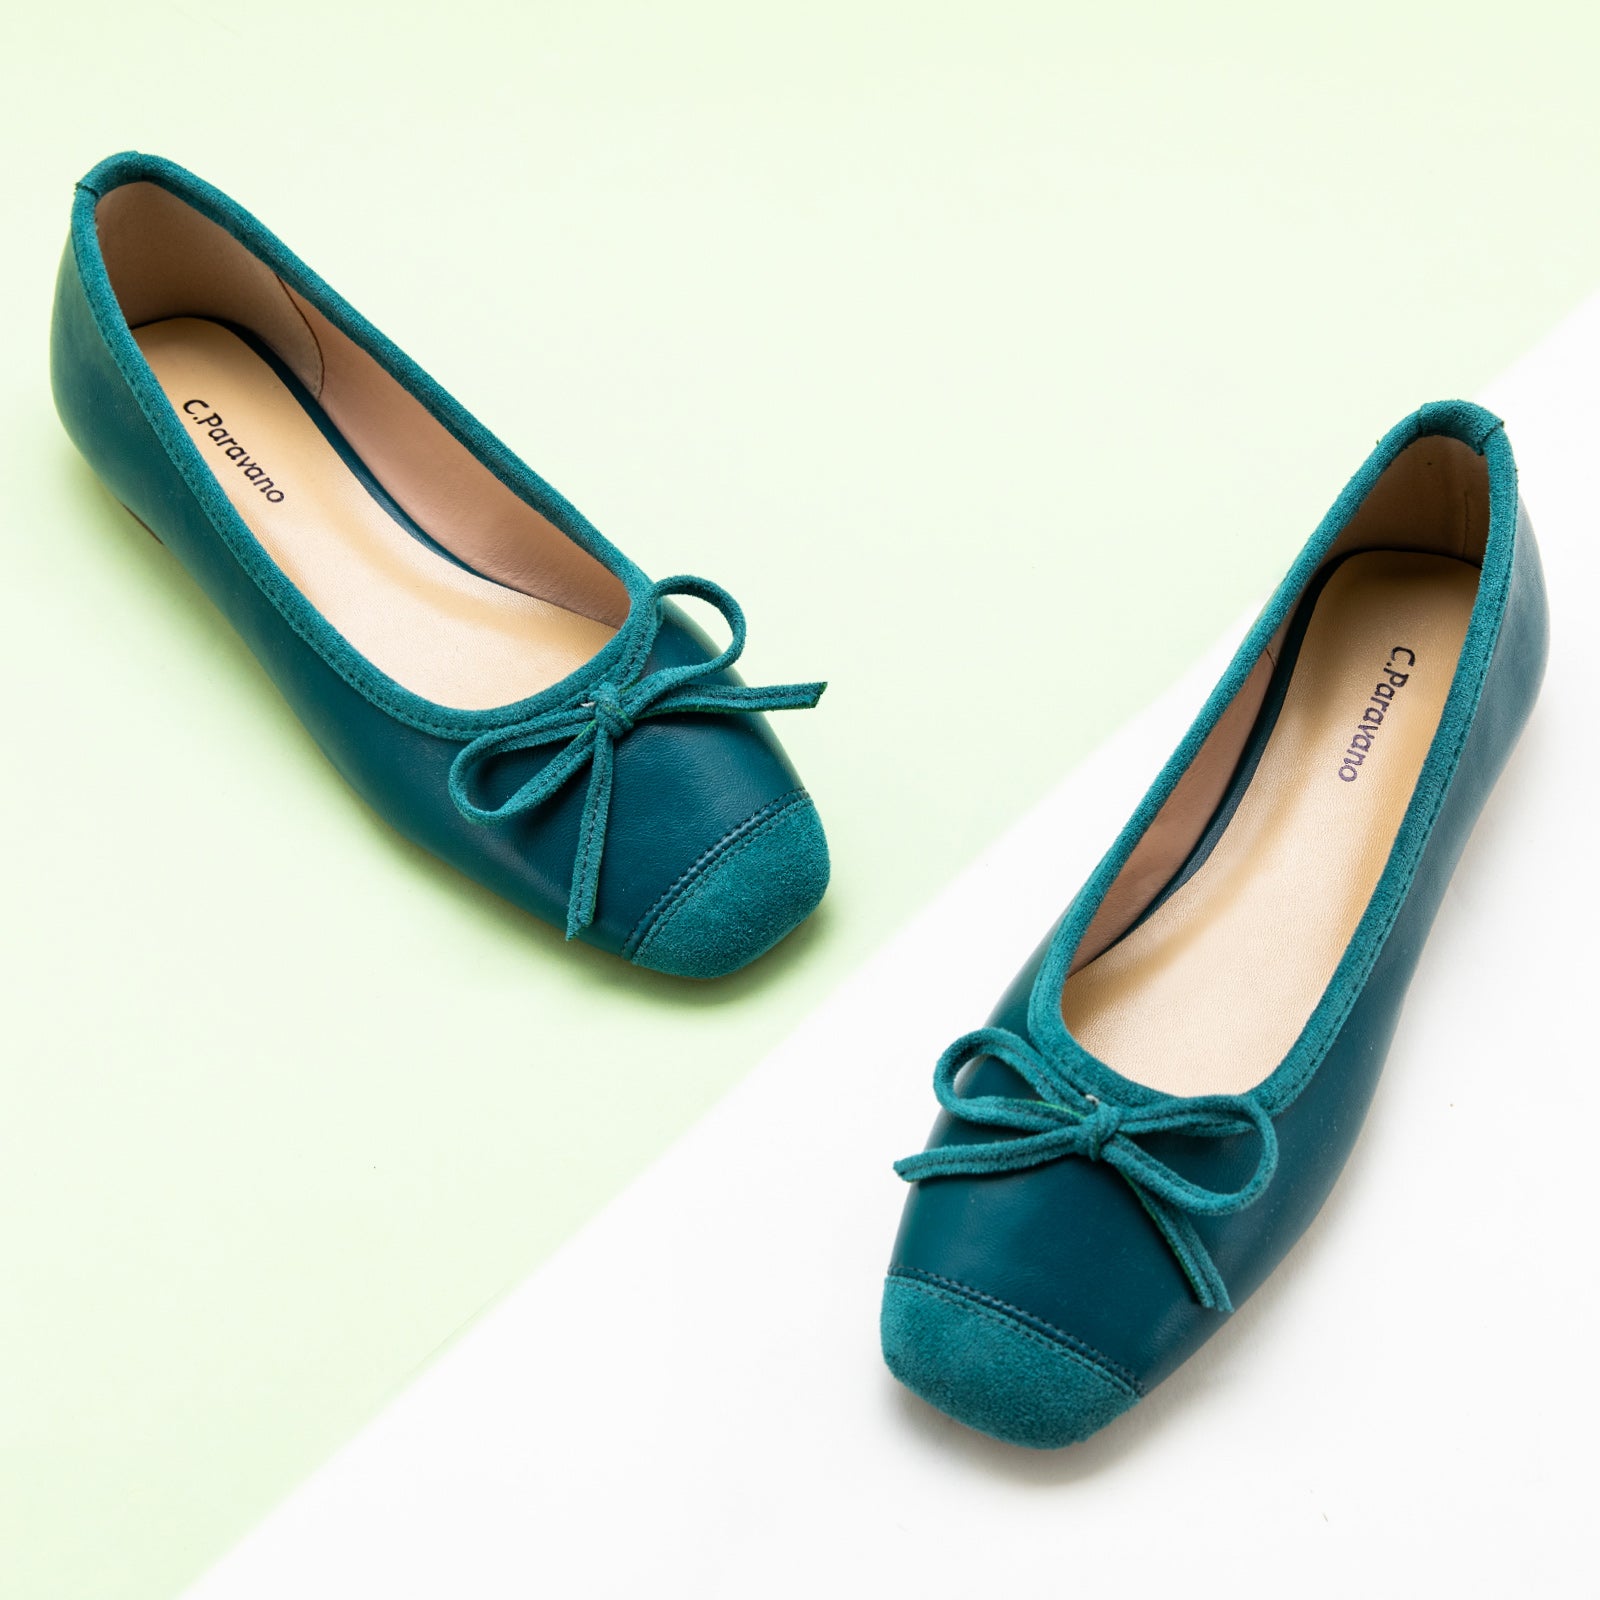 Blue Suede Ballet Flats with a charming bow detail, offering a chic and stylish option for a maritime-inspired look